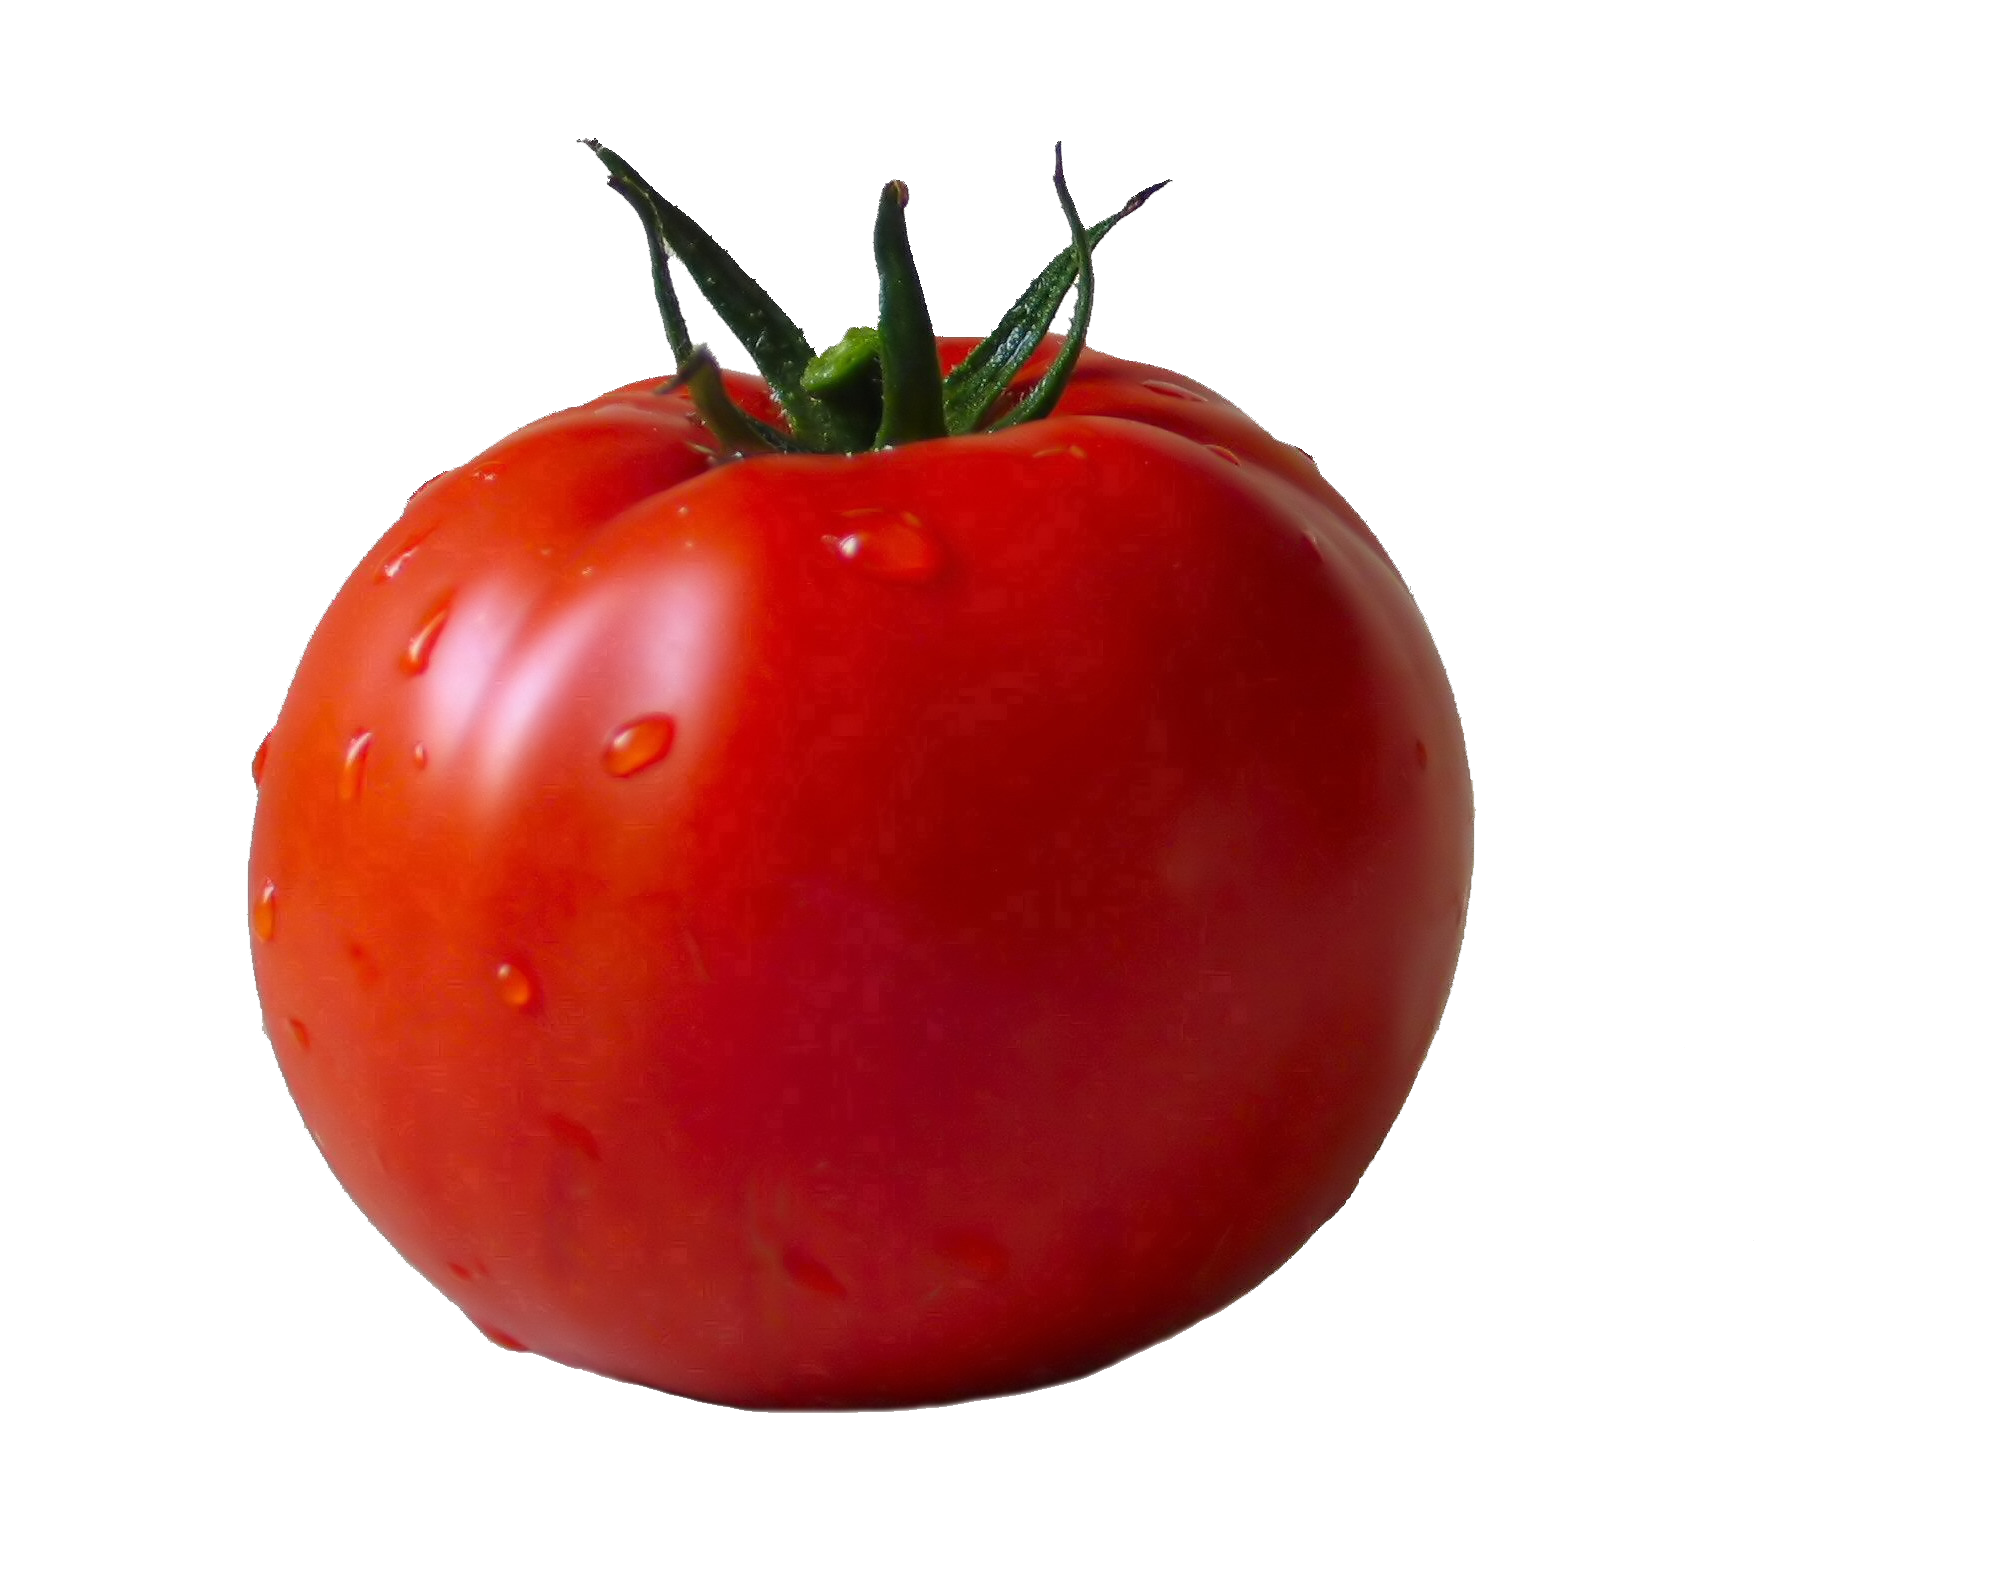 Tomato Png, Image, Picture   Tomato Hd Png - Tomato, Transparent background PNG HD thumbnail